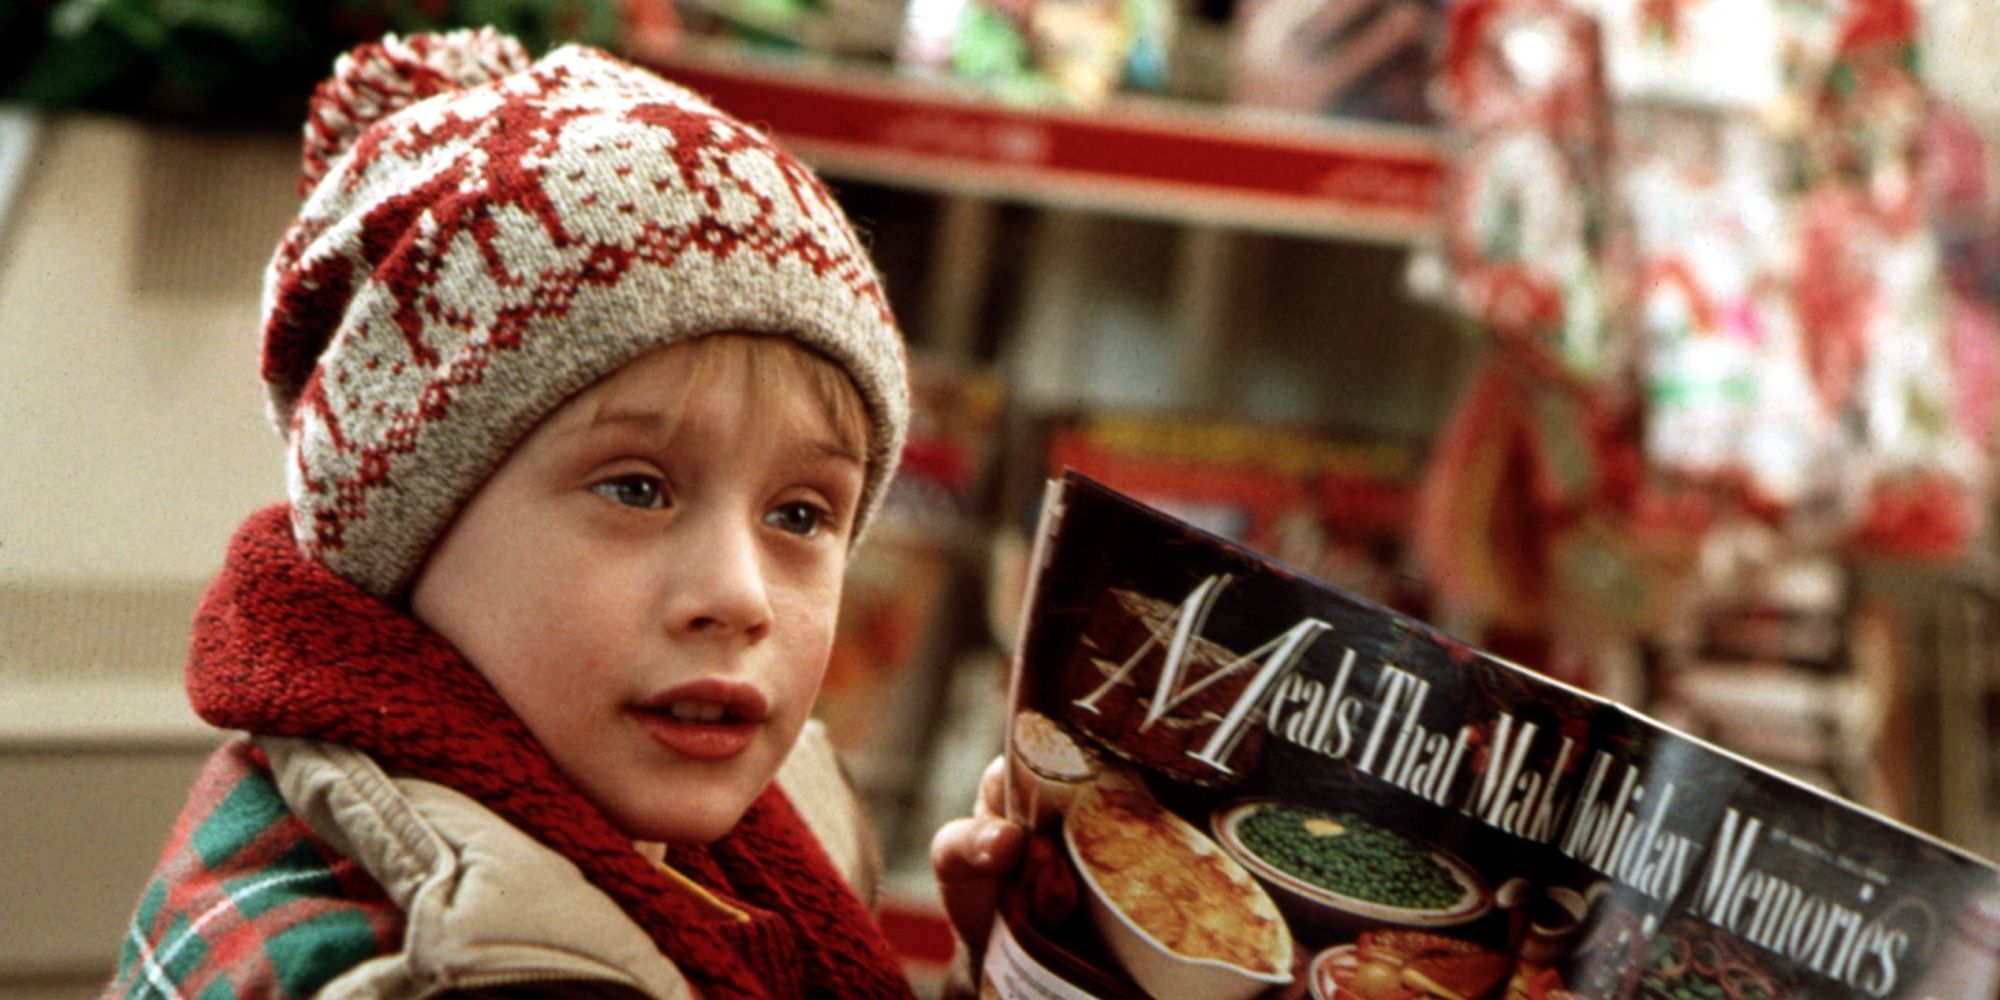 Kevin reading a magazine in Home Alone